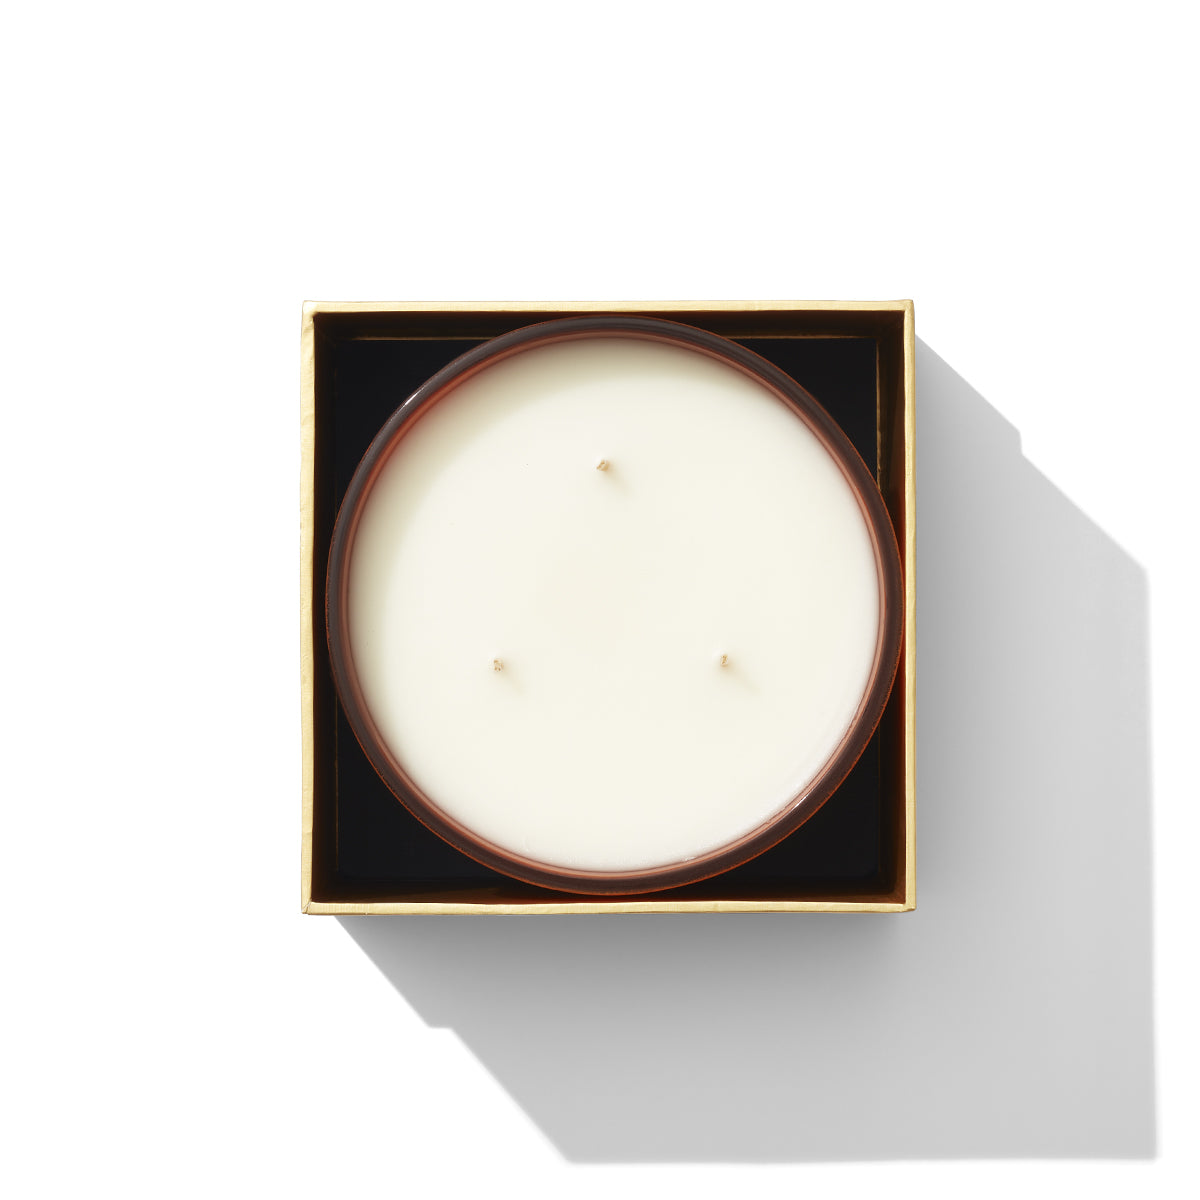 Floris London Holiday Cinnamon Tangerine 3 Wick Candle Top View inside the box